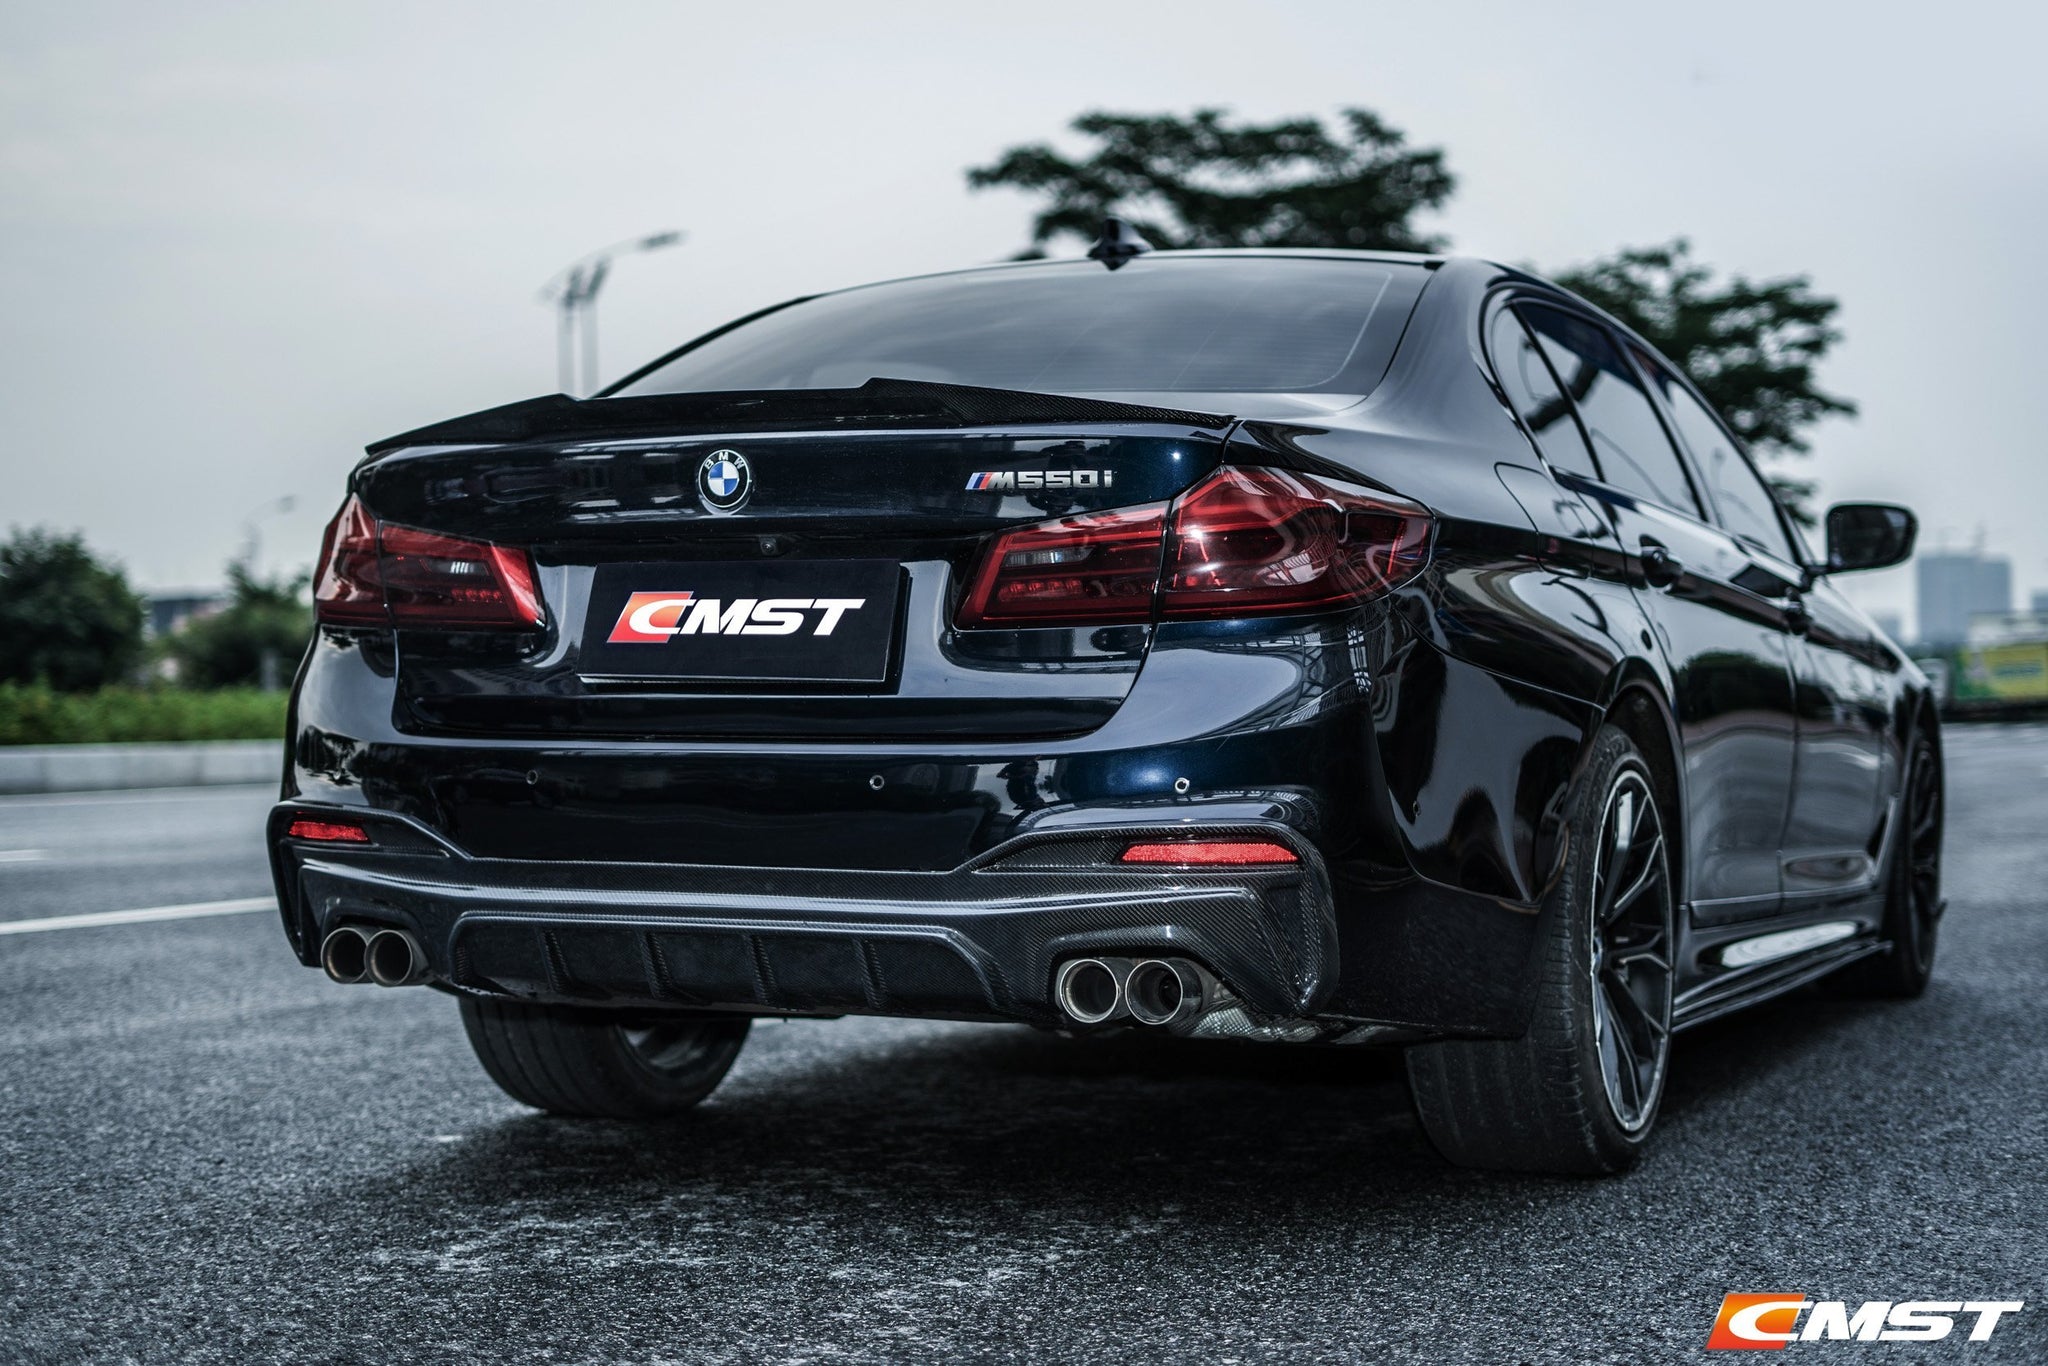 Check our price and buy CMST Carbon Fiber Body Kit set for BMW 5 Series G30/G31!